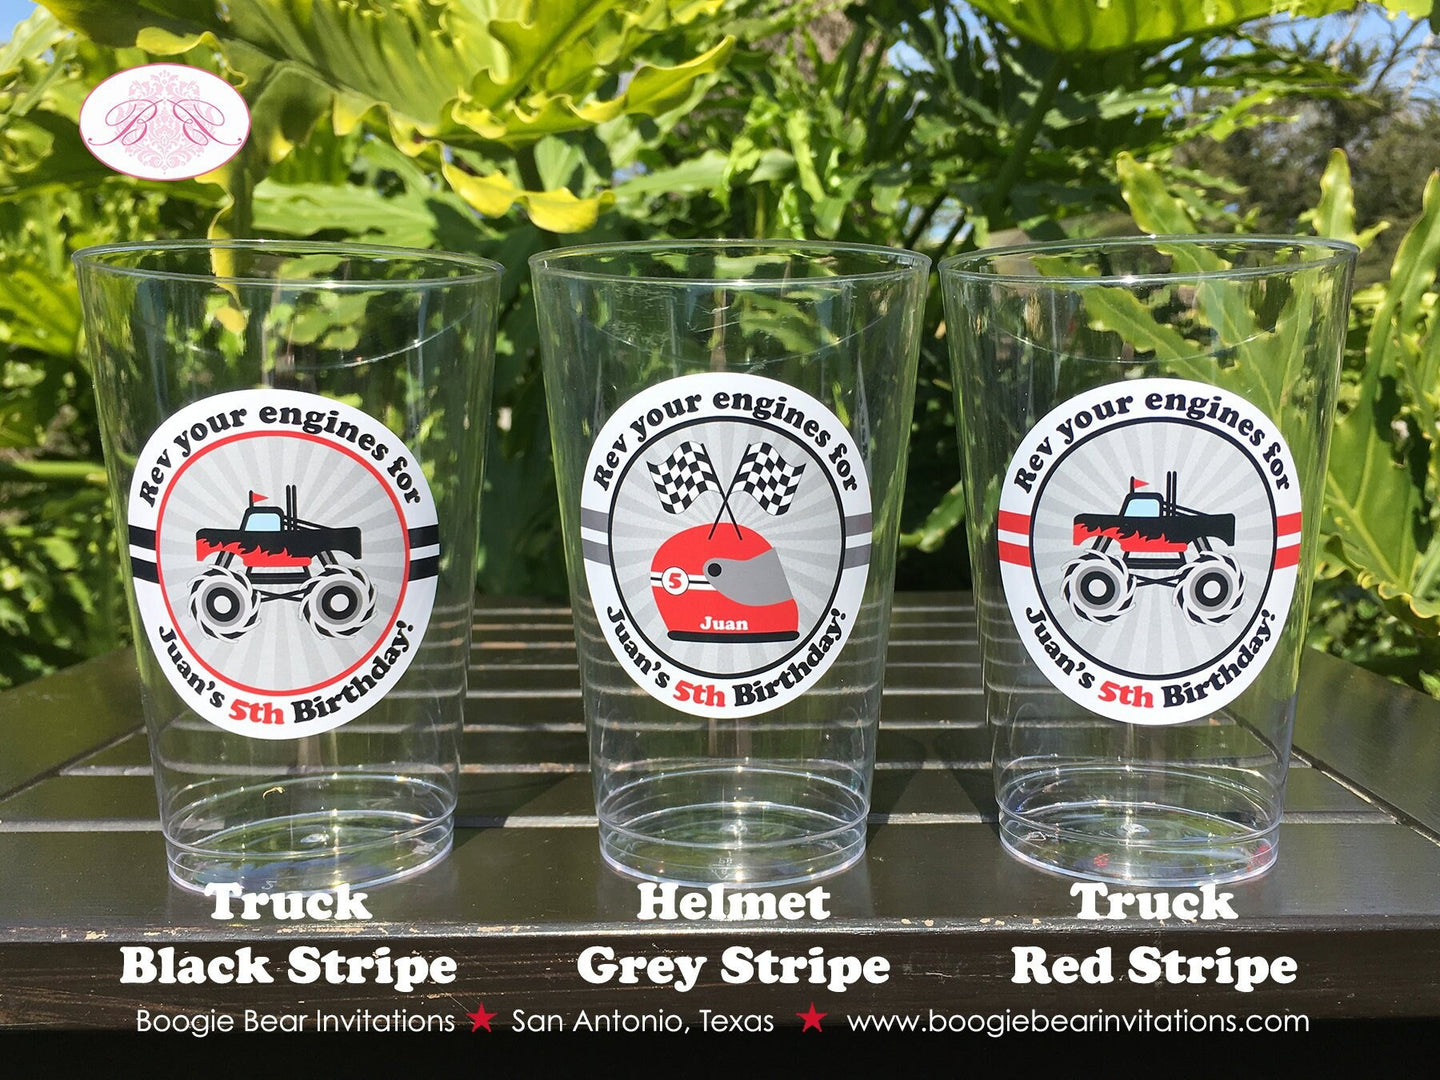 Monster Truck Birthday Party Beverage Cups Plastic Drink Boy Girl Red Black Demo Arena Racing Show Race Boogie Bear Invitations Juan Theme